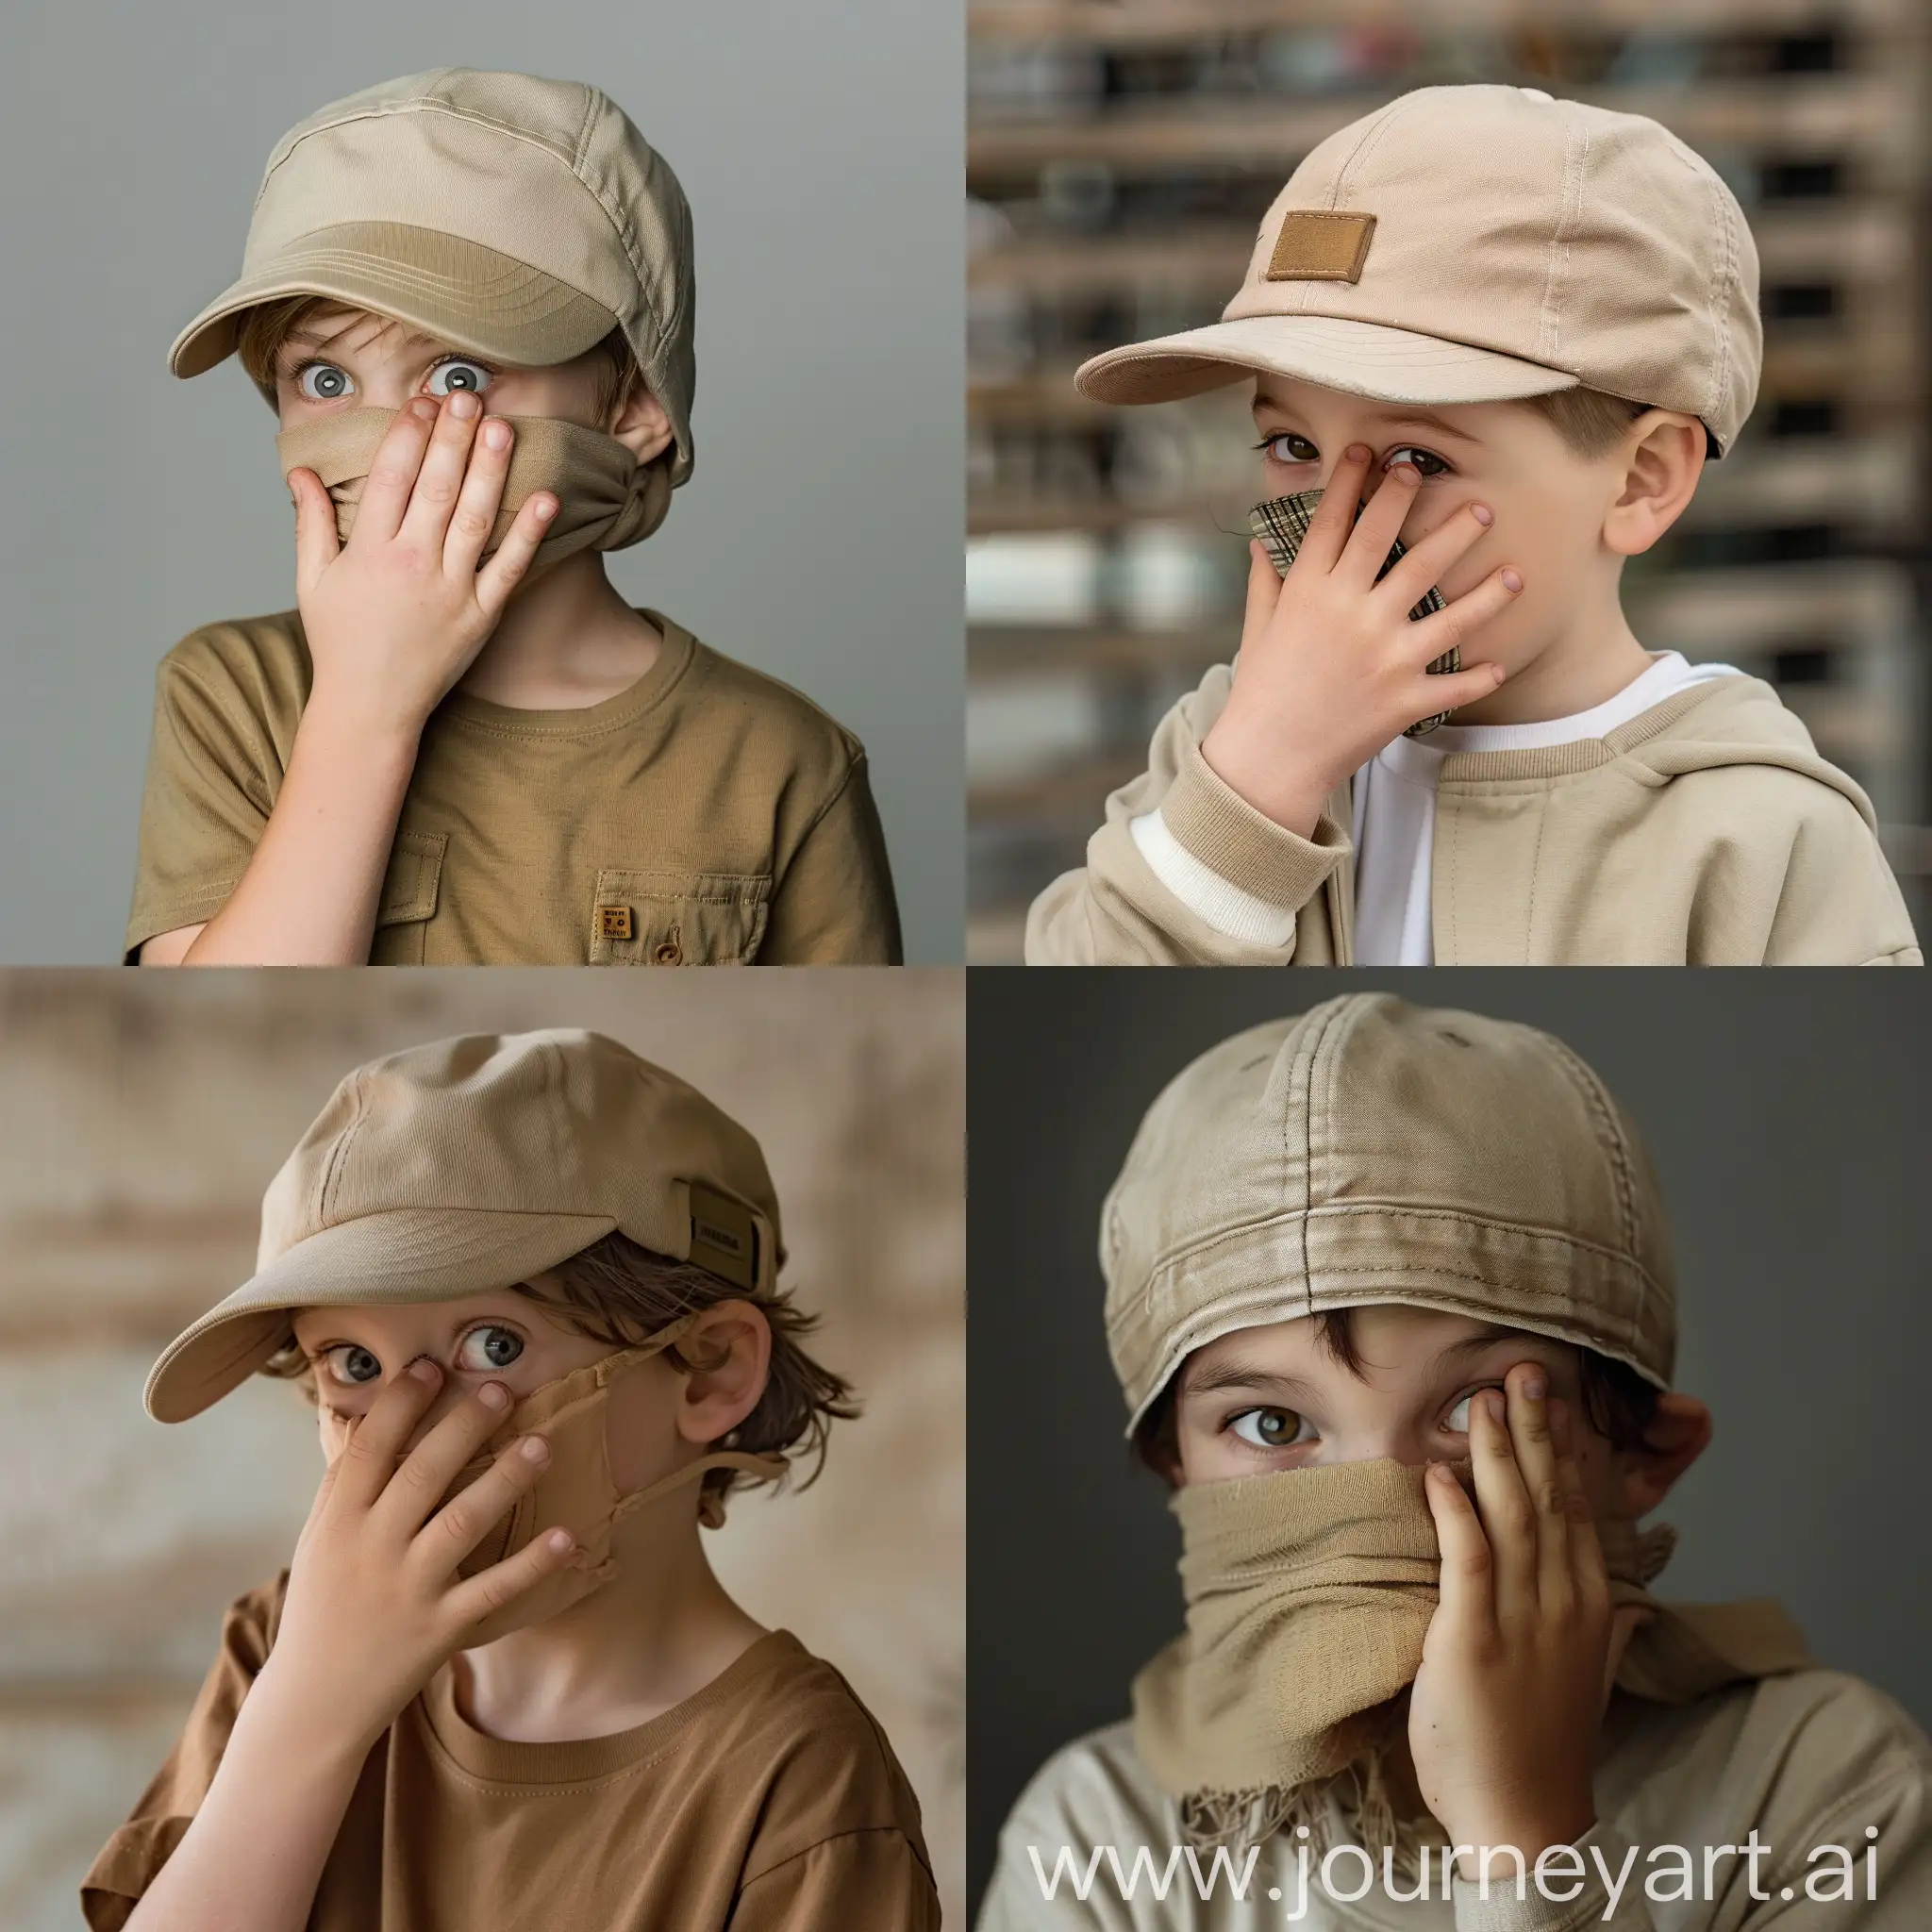 Adolescent-Boy-in-Beige-Backwards-Hat-Covering-Mouth